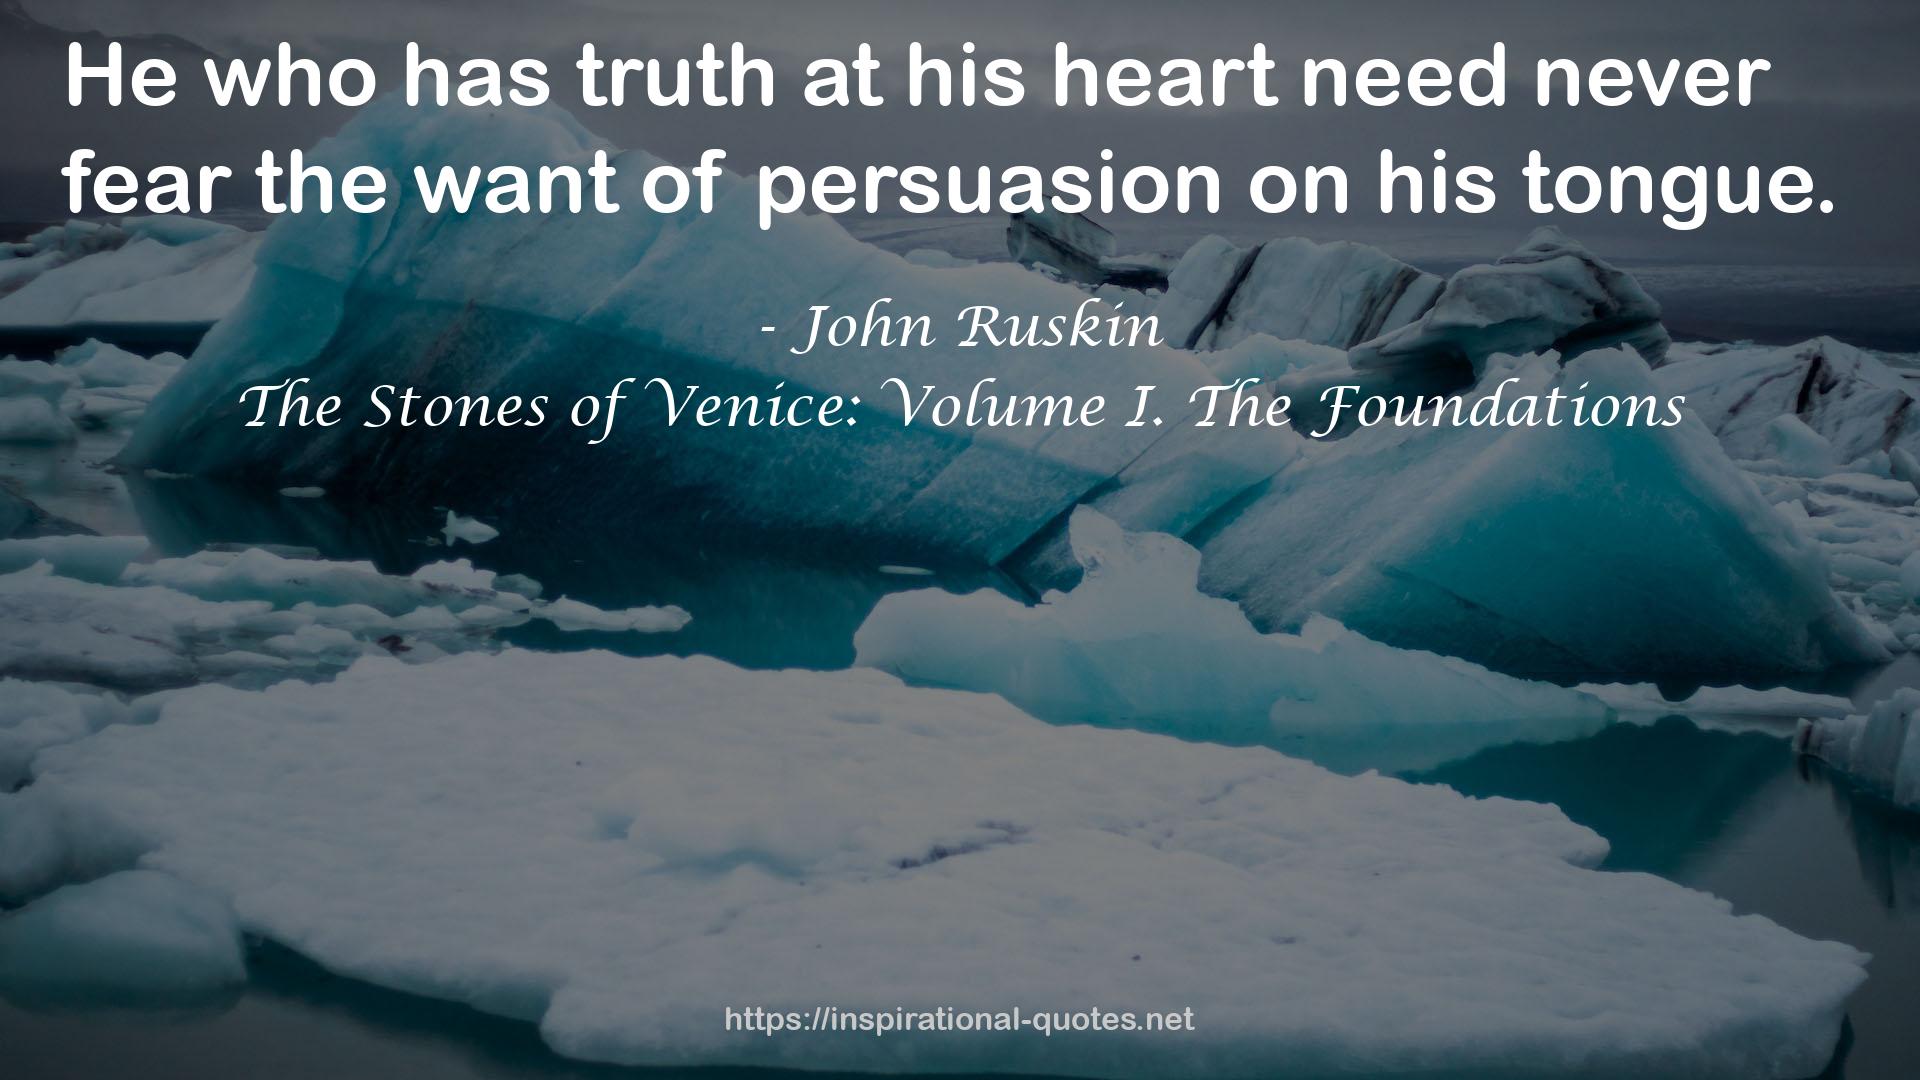 The Stones of Venice: Volume I. The Foundations QUOTES